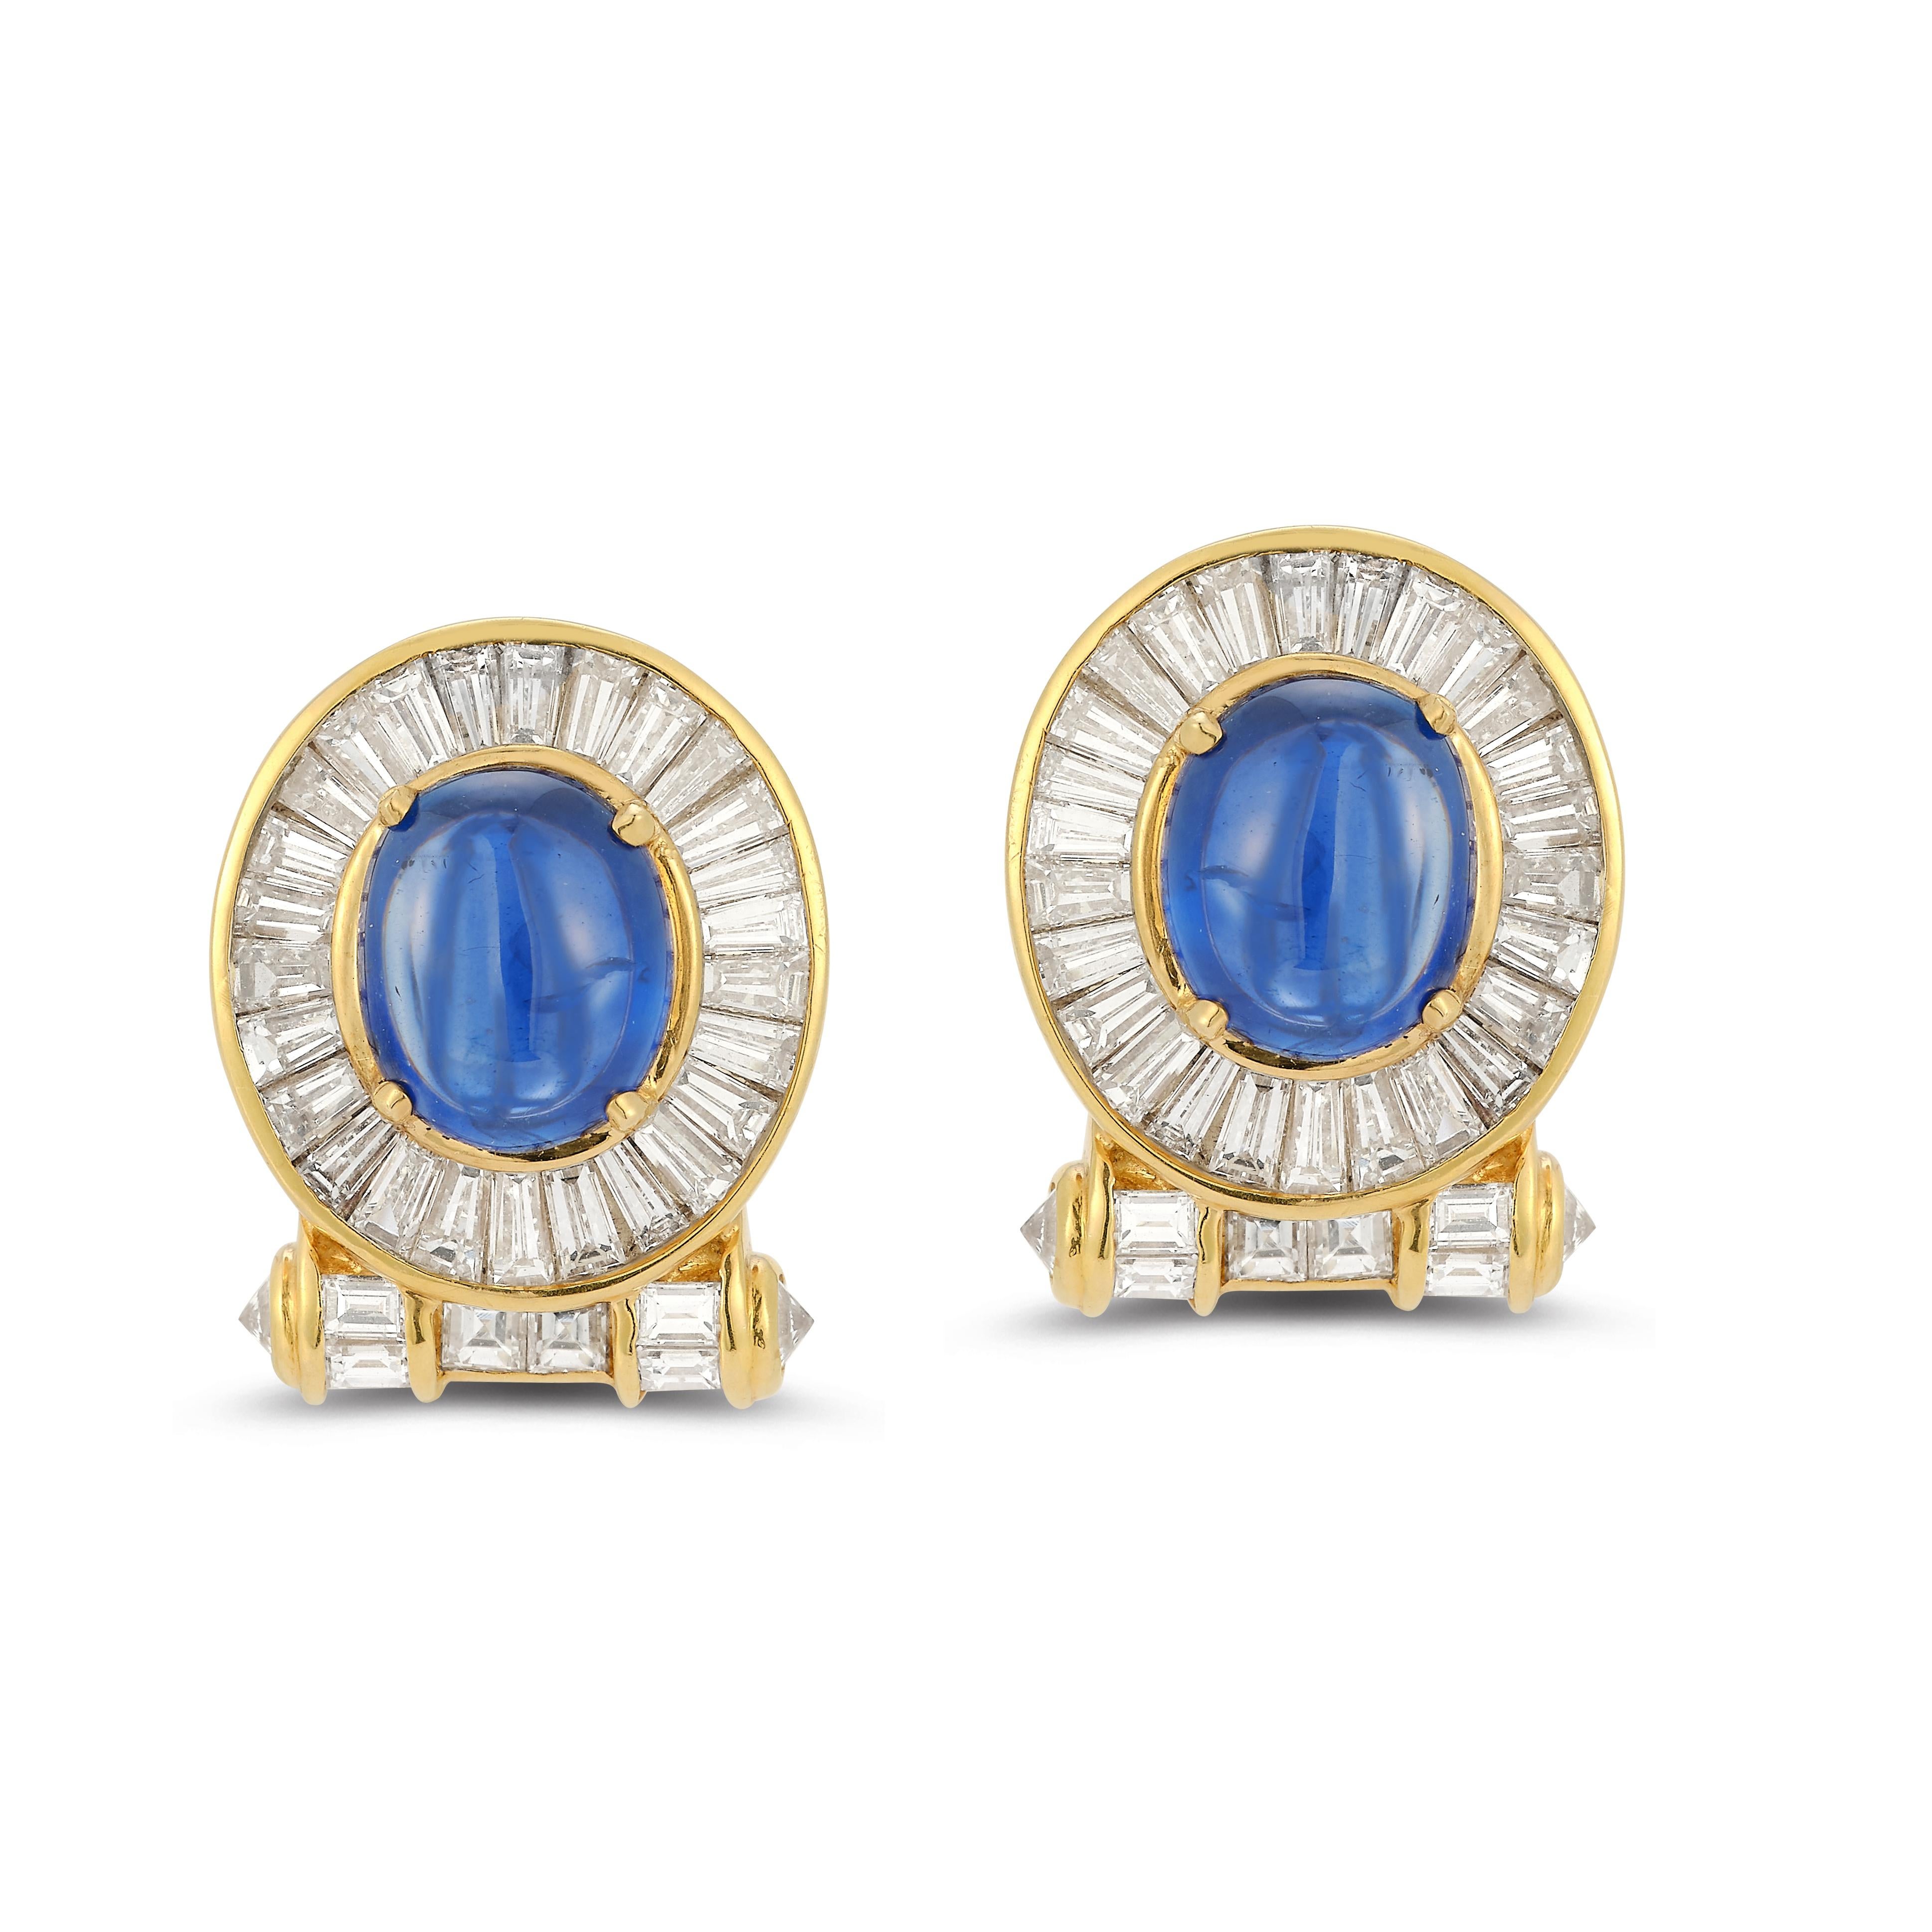 Cabochon Sapphire & Diamond Earrings

Cabochon sapphires surrounded by baguette & round cut diamonds set in 18k yellow gold.

Sapphire Weight: approximately 6.01 cts 

Round Cut Diamond Weight: approximately .24 cts 
Baguette Cut Diamond Weight: